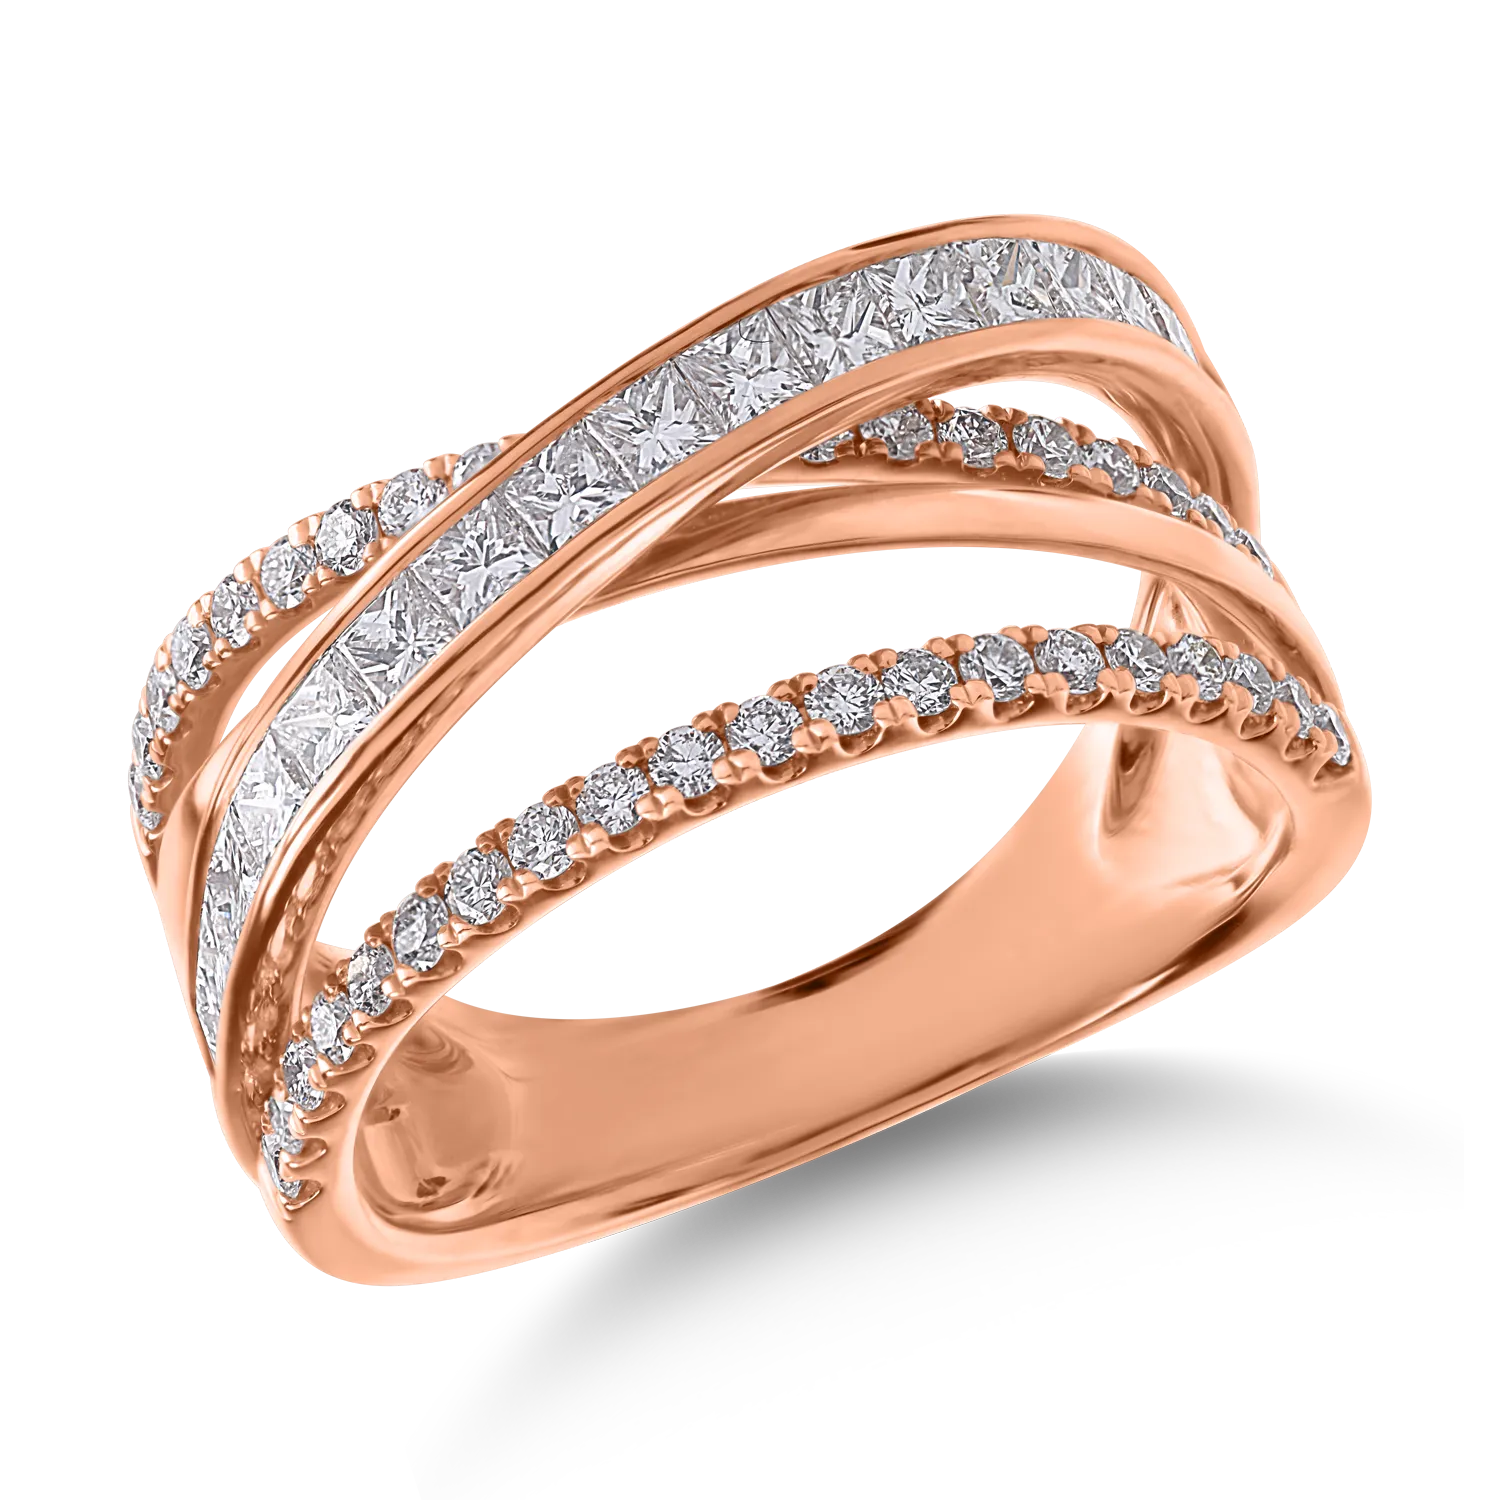 Rose gold ring with 1.23ct diamonds